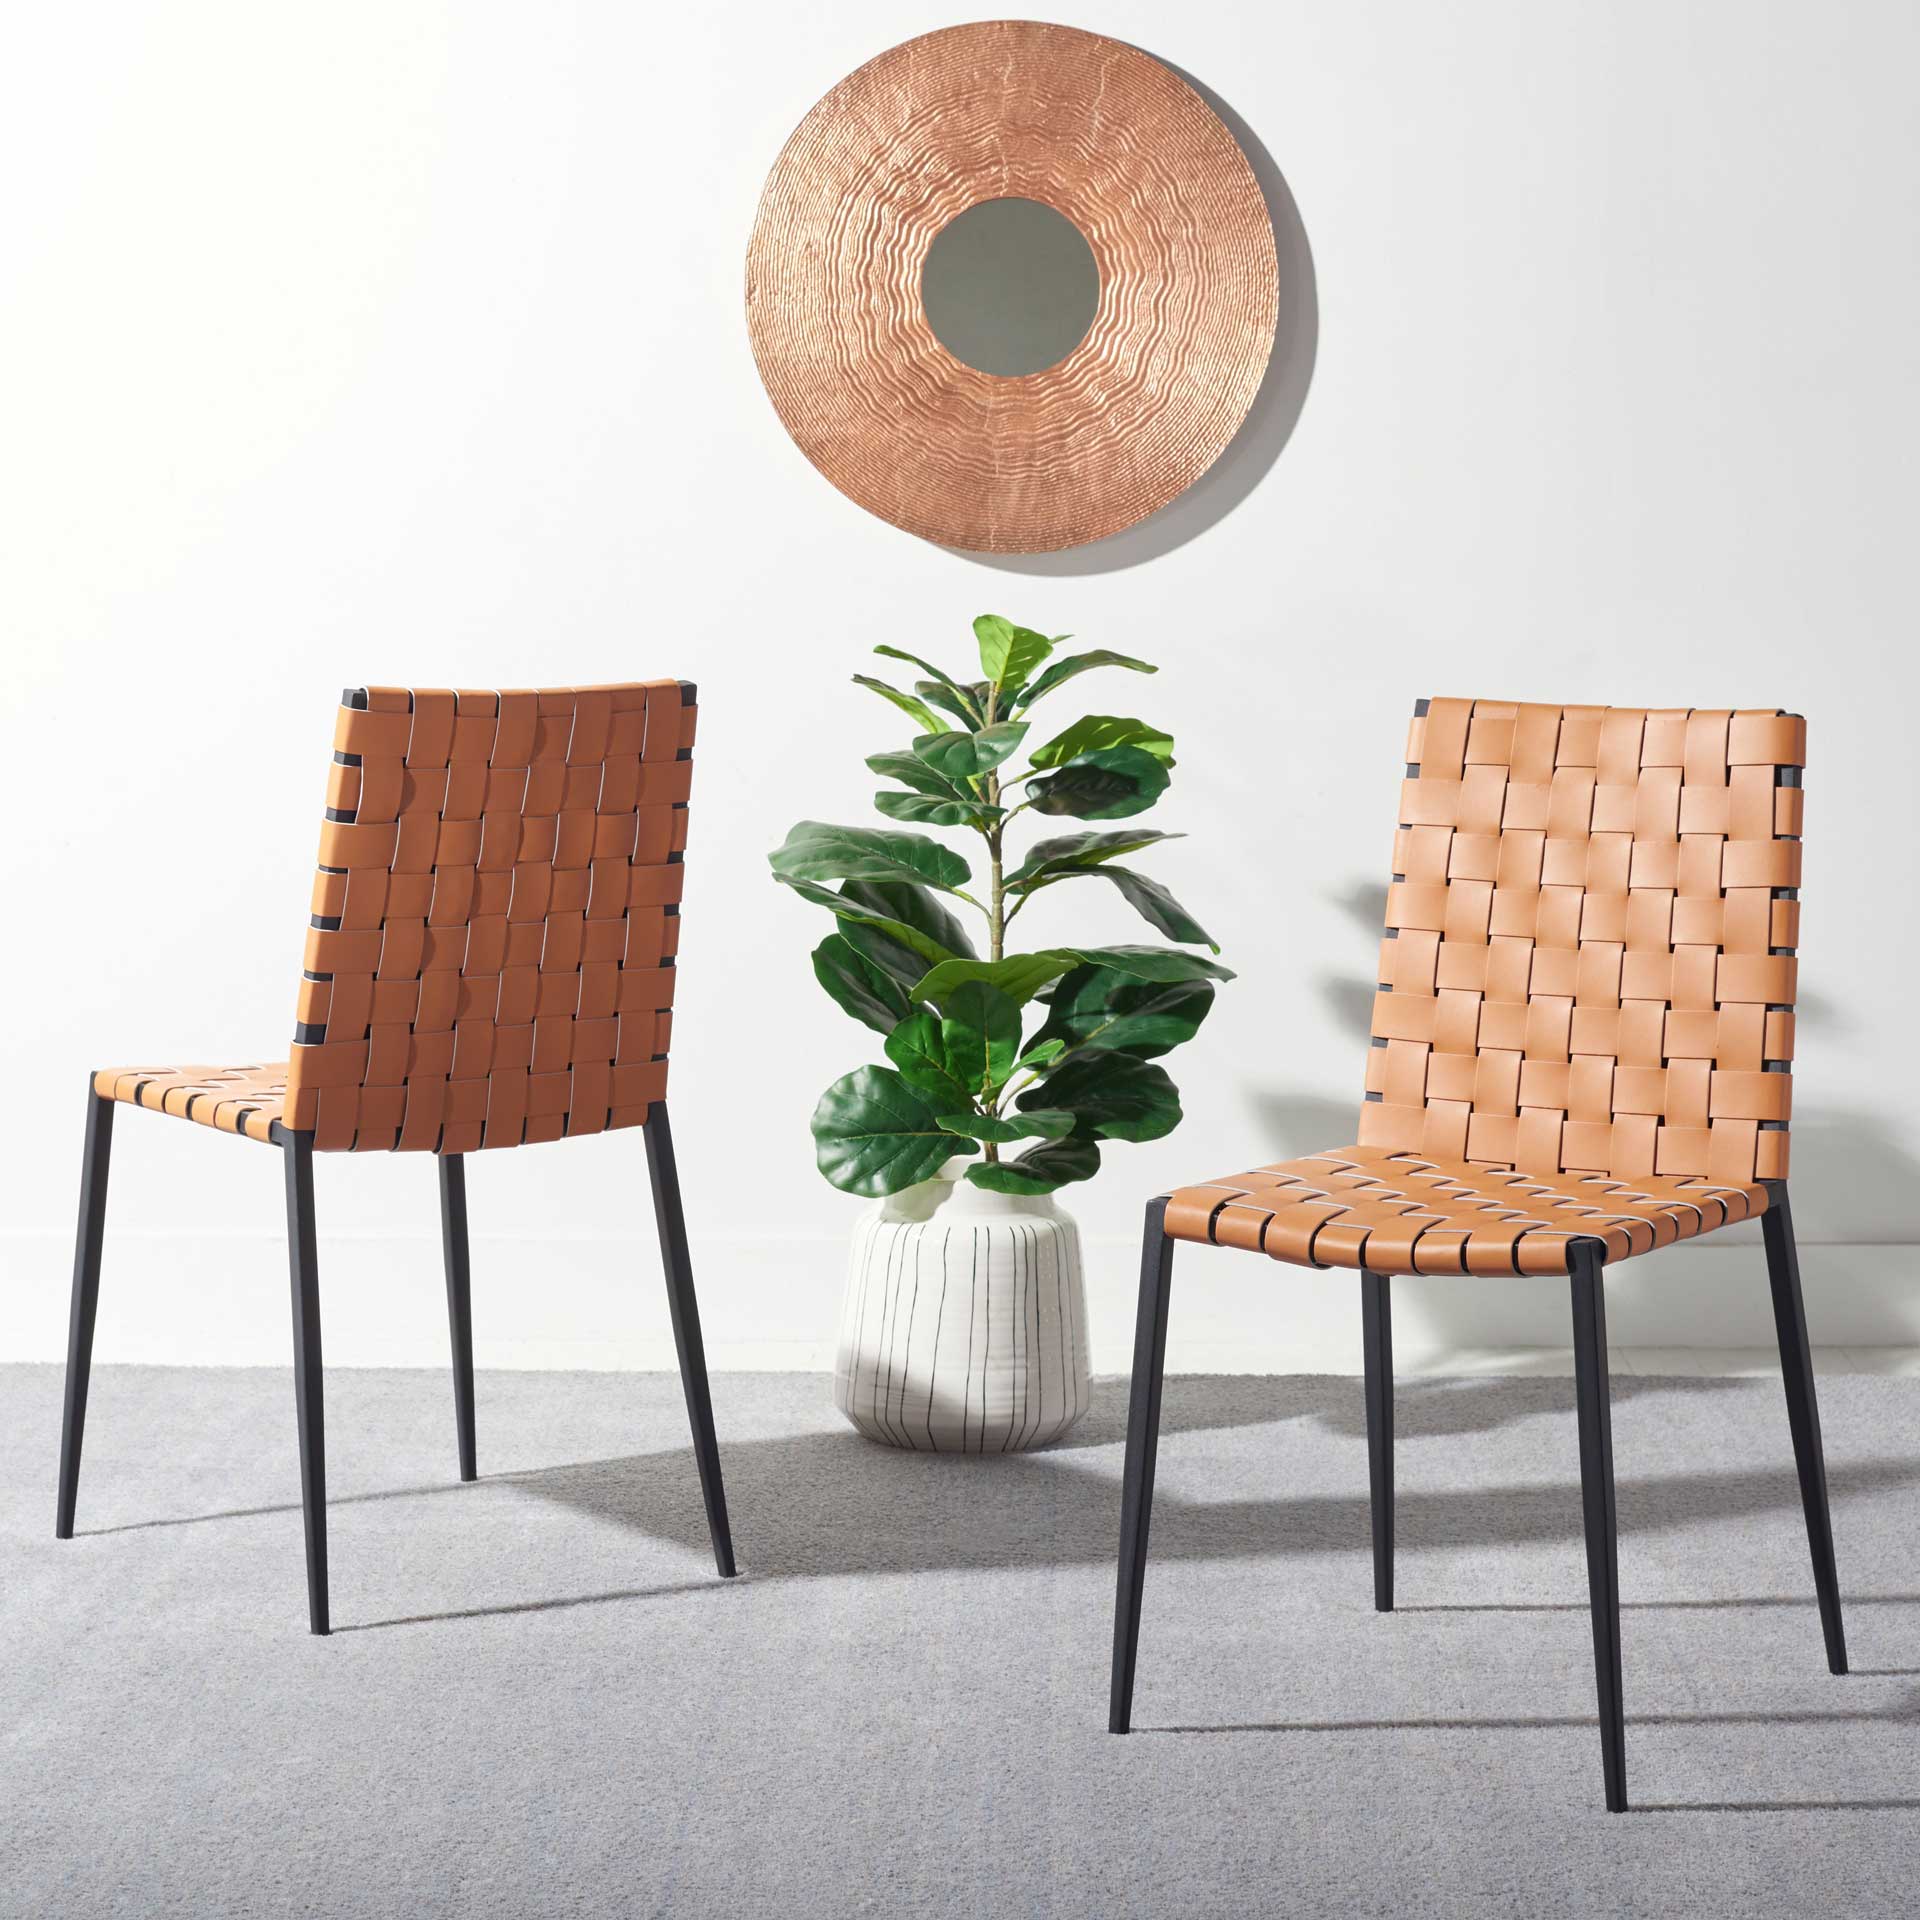 Ralen Woven Dining Chair Natural/Black (Set of 2)